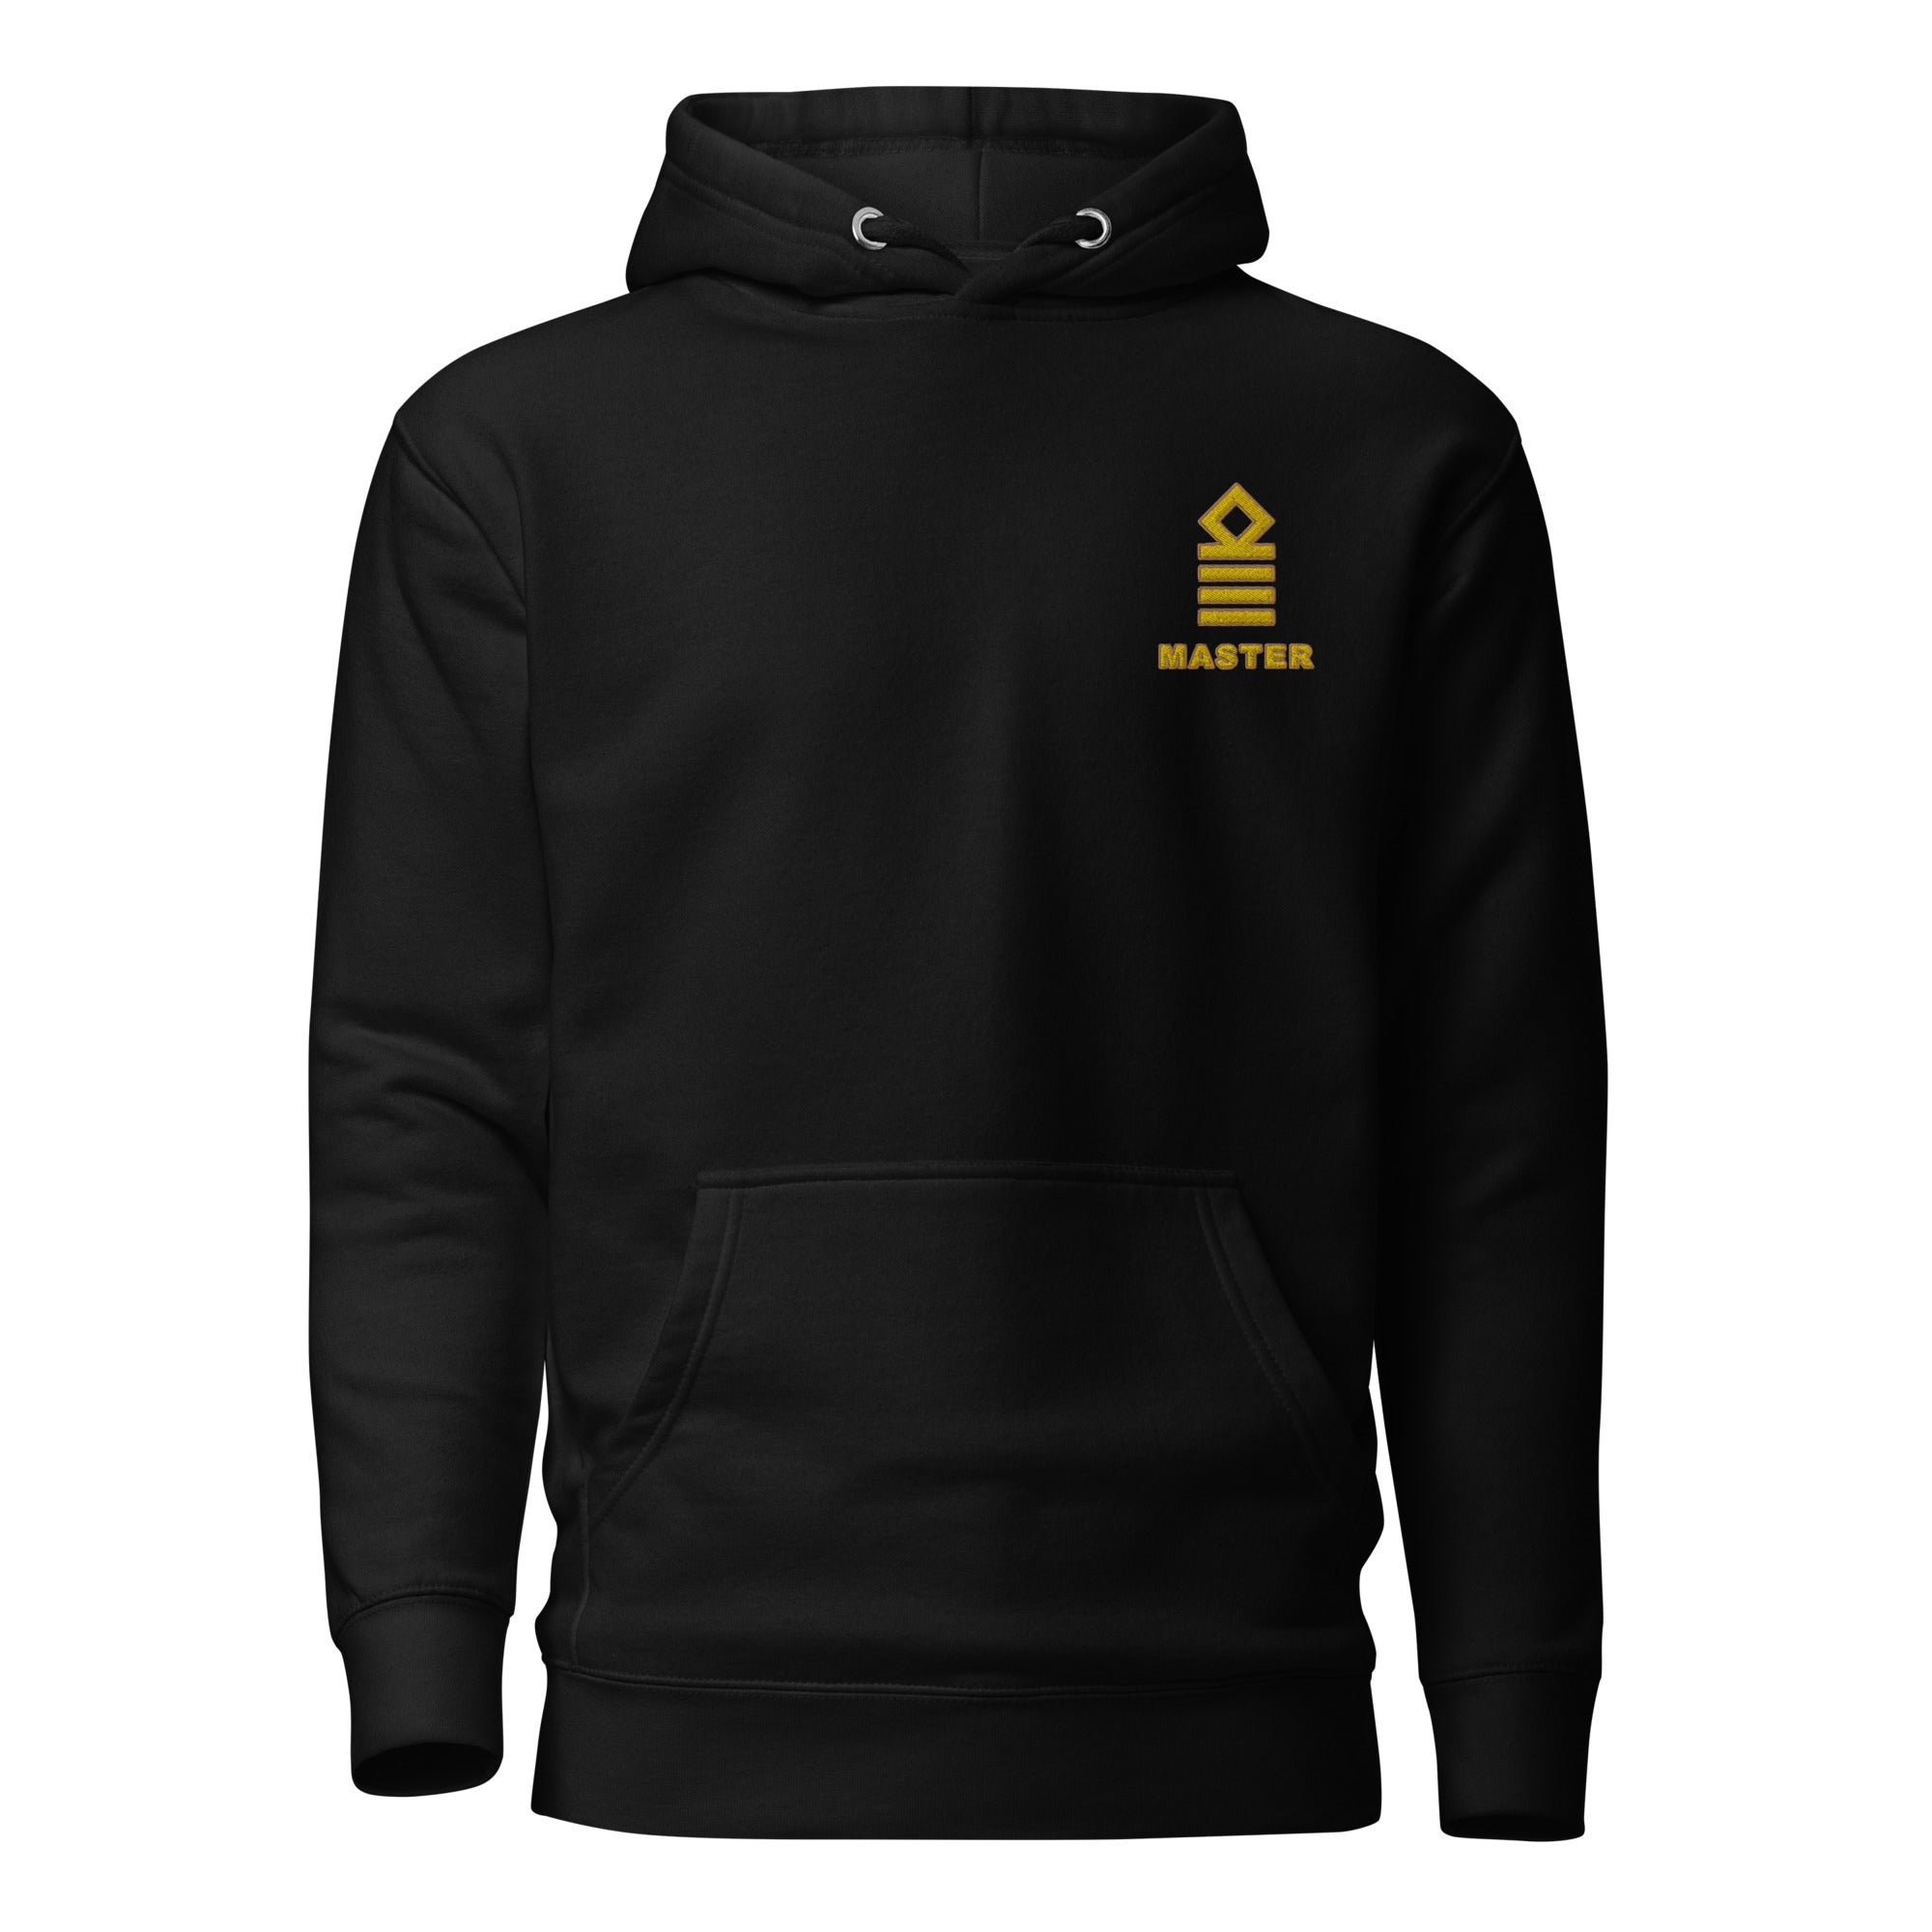 Hoodie Master mariner with embroidery